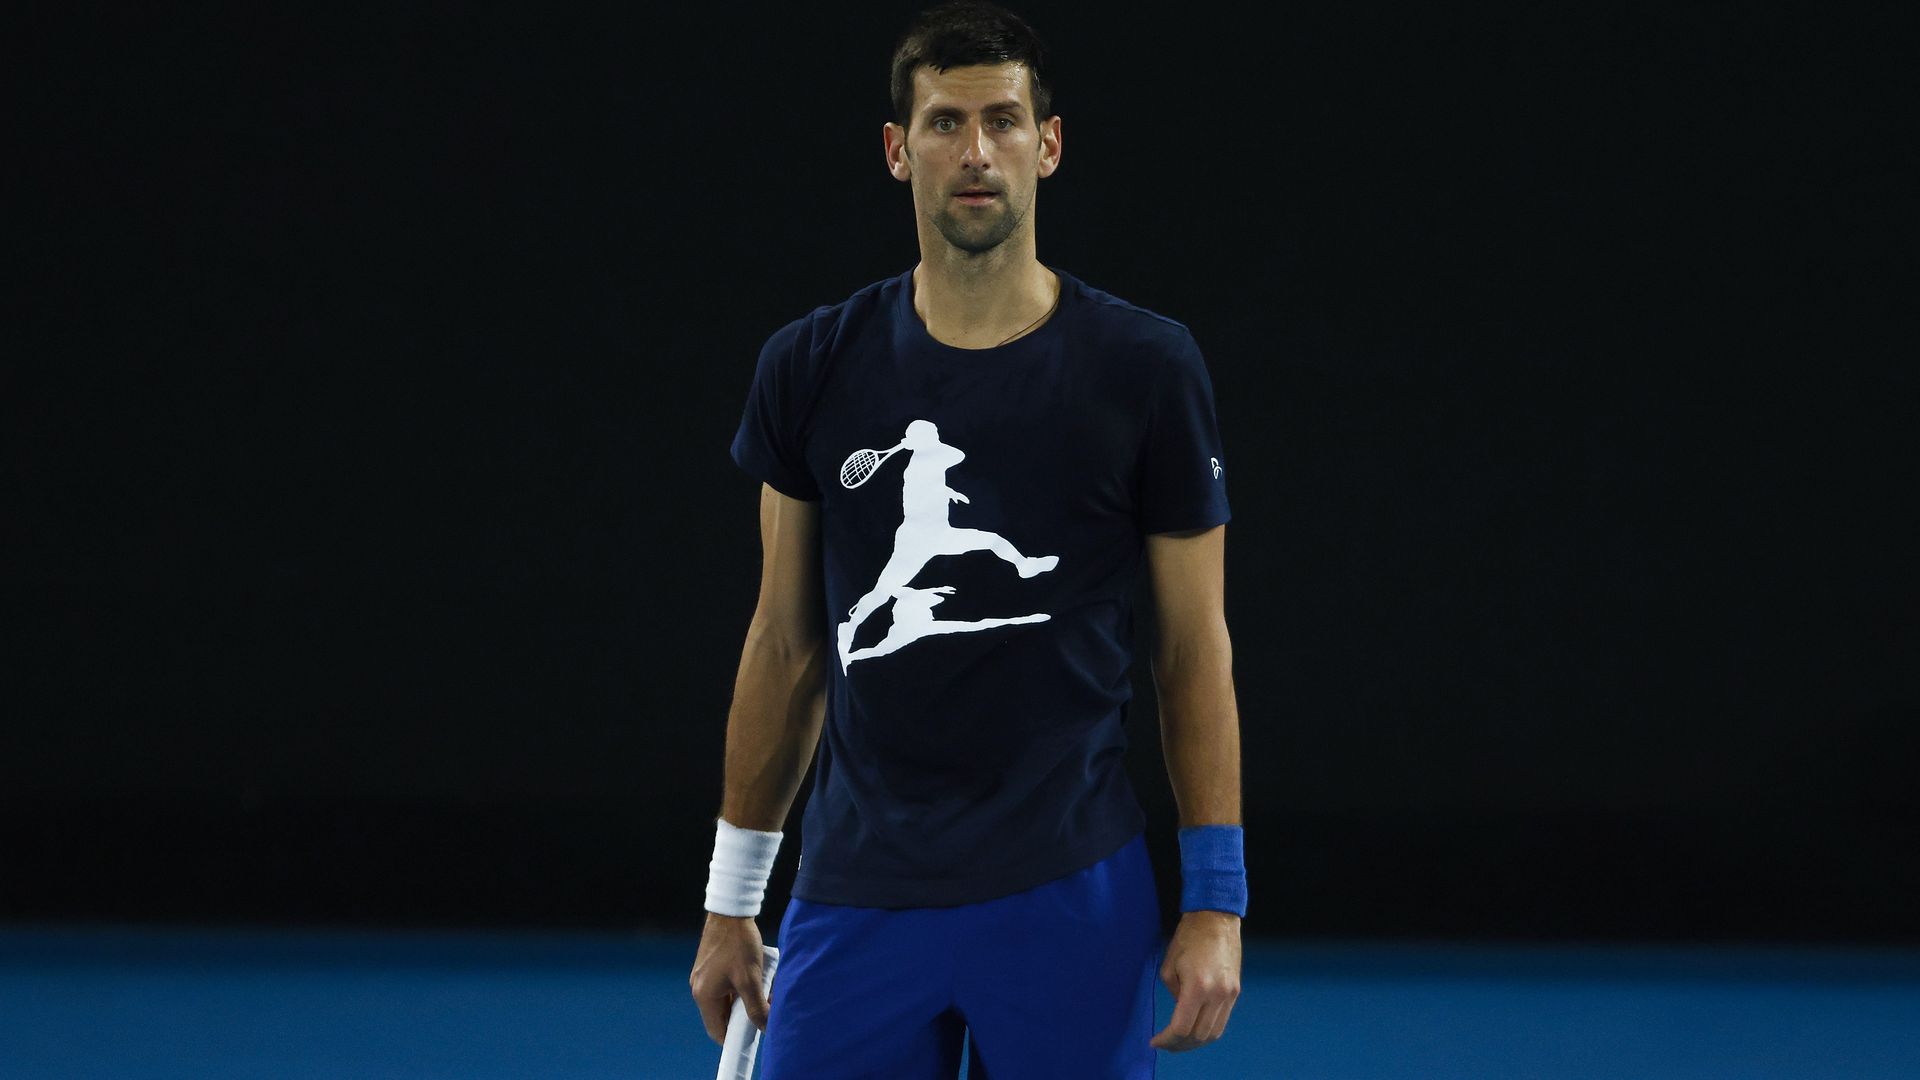  Novak Djokovic of Serbia looks on during a practice session ahead of the 2022 Australian Open at Melbourne Park on January 14, 2022 in Melbourne, Australia.